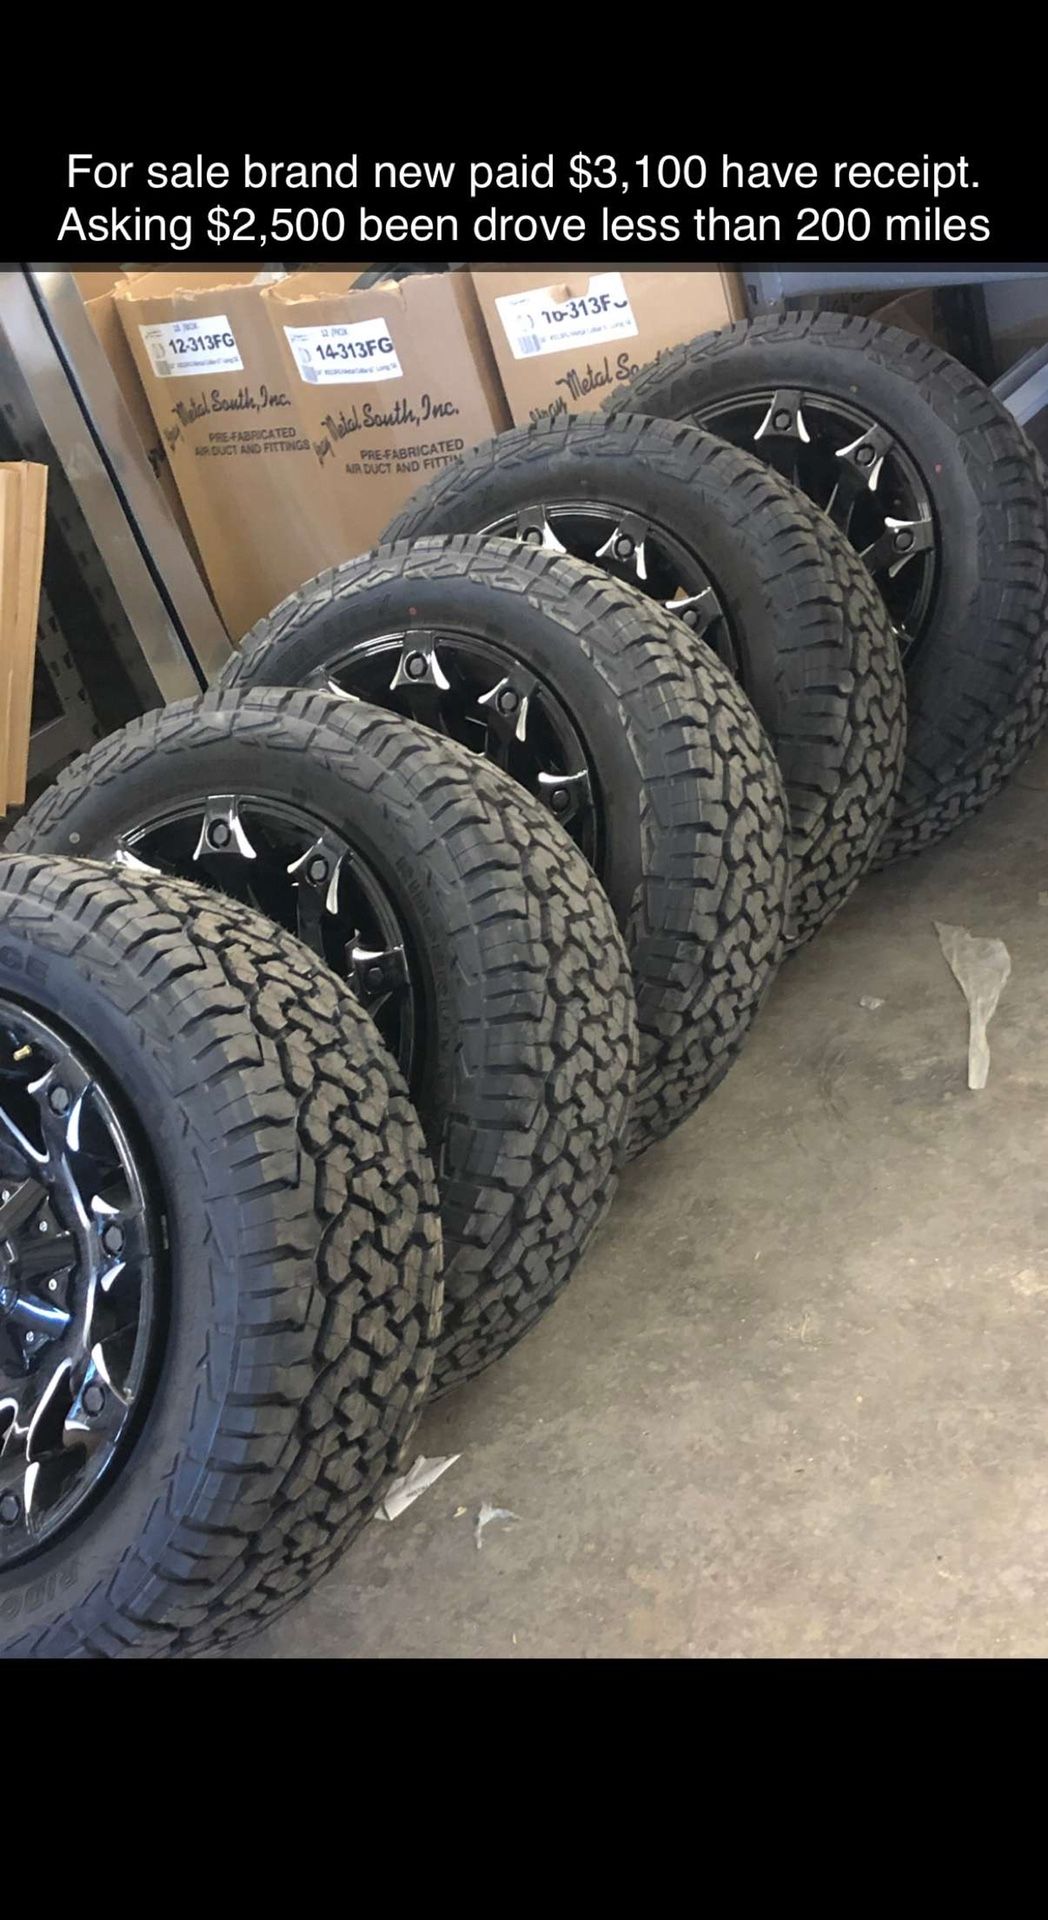 5 BRAND NEW Tires And Rims  Just Bought Last Month, I Have Receipt  Have Less Than 200 Miles Driven On Them.20 Inch Fuel Rims, Tires 33X12.50X20 